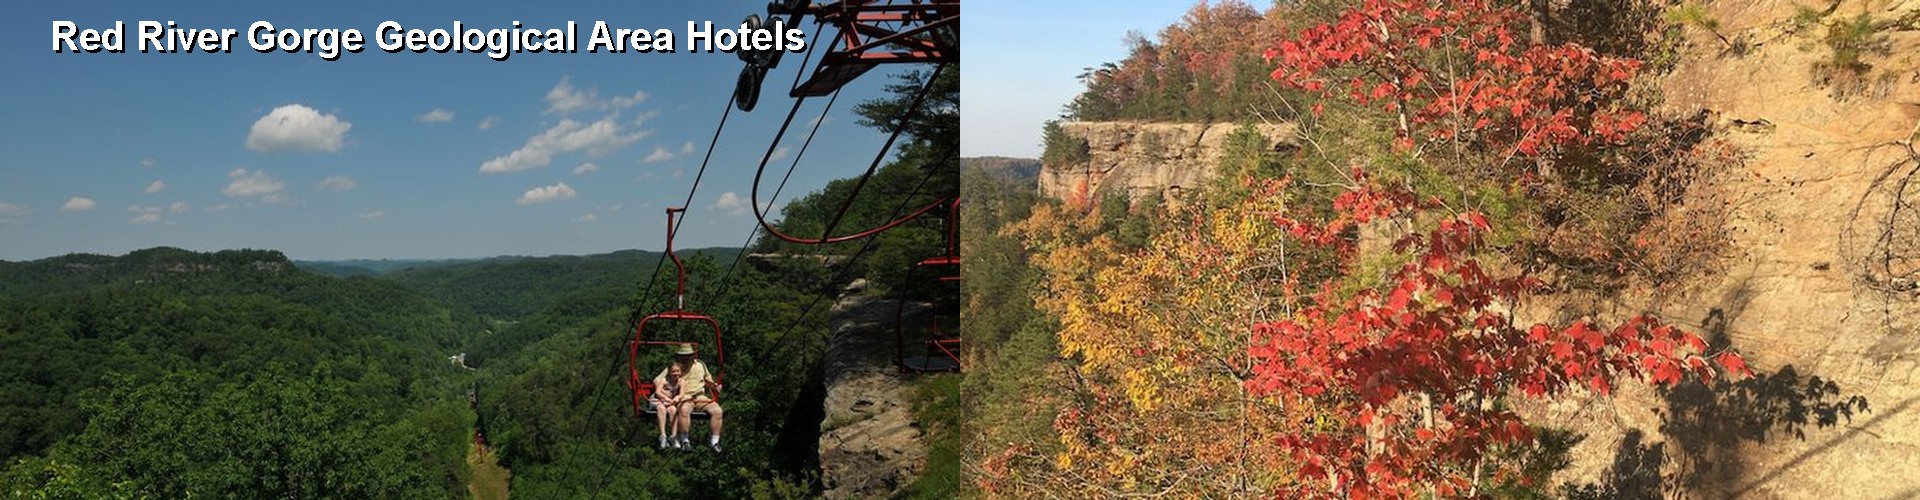 5 Best Hotels near Red River Gorge Geological Area